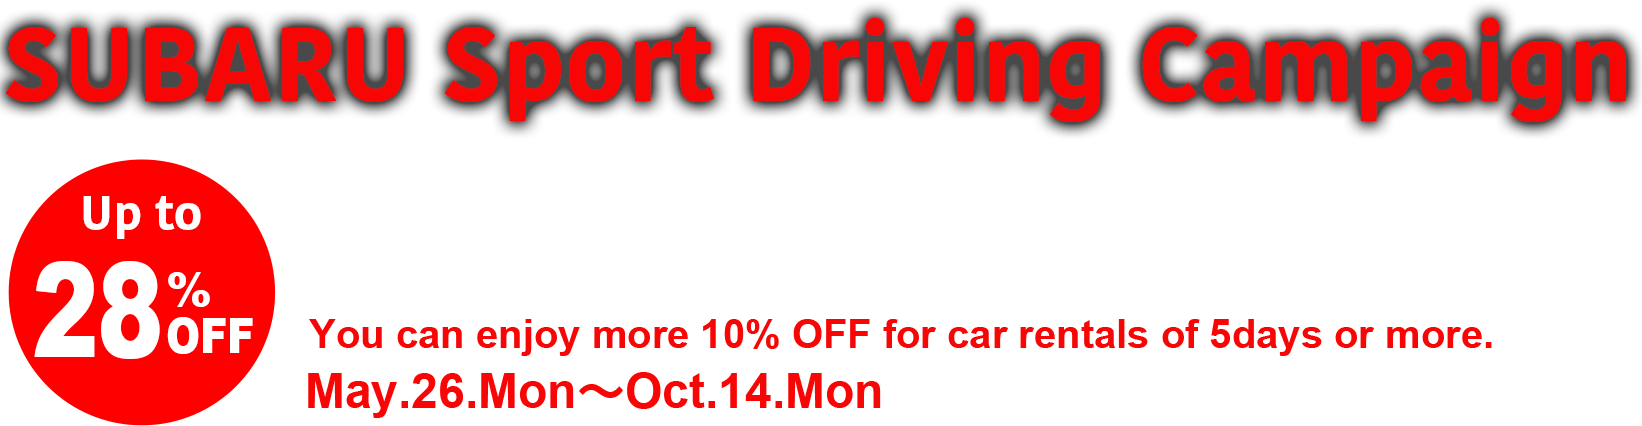 SUBARU Sport Driving Campaign Enjoy with “Sonic PLUS” Speaker package For L-D Class BRZ  STI Sport, L-E Class WRX STI Up to 28%OFF You can enjoy more 10% OFF for car rentals of 5days or more. May.26.Mon〜Oct.14.Mon